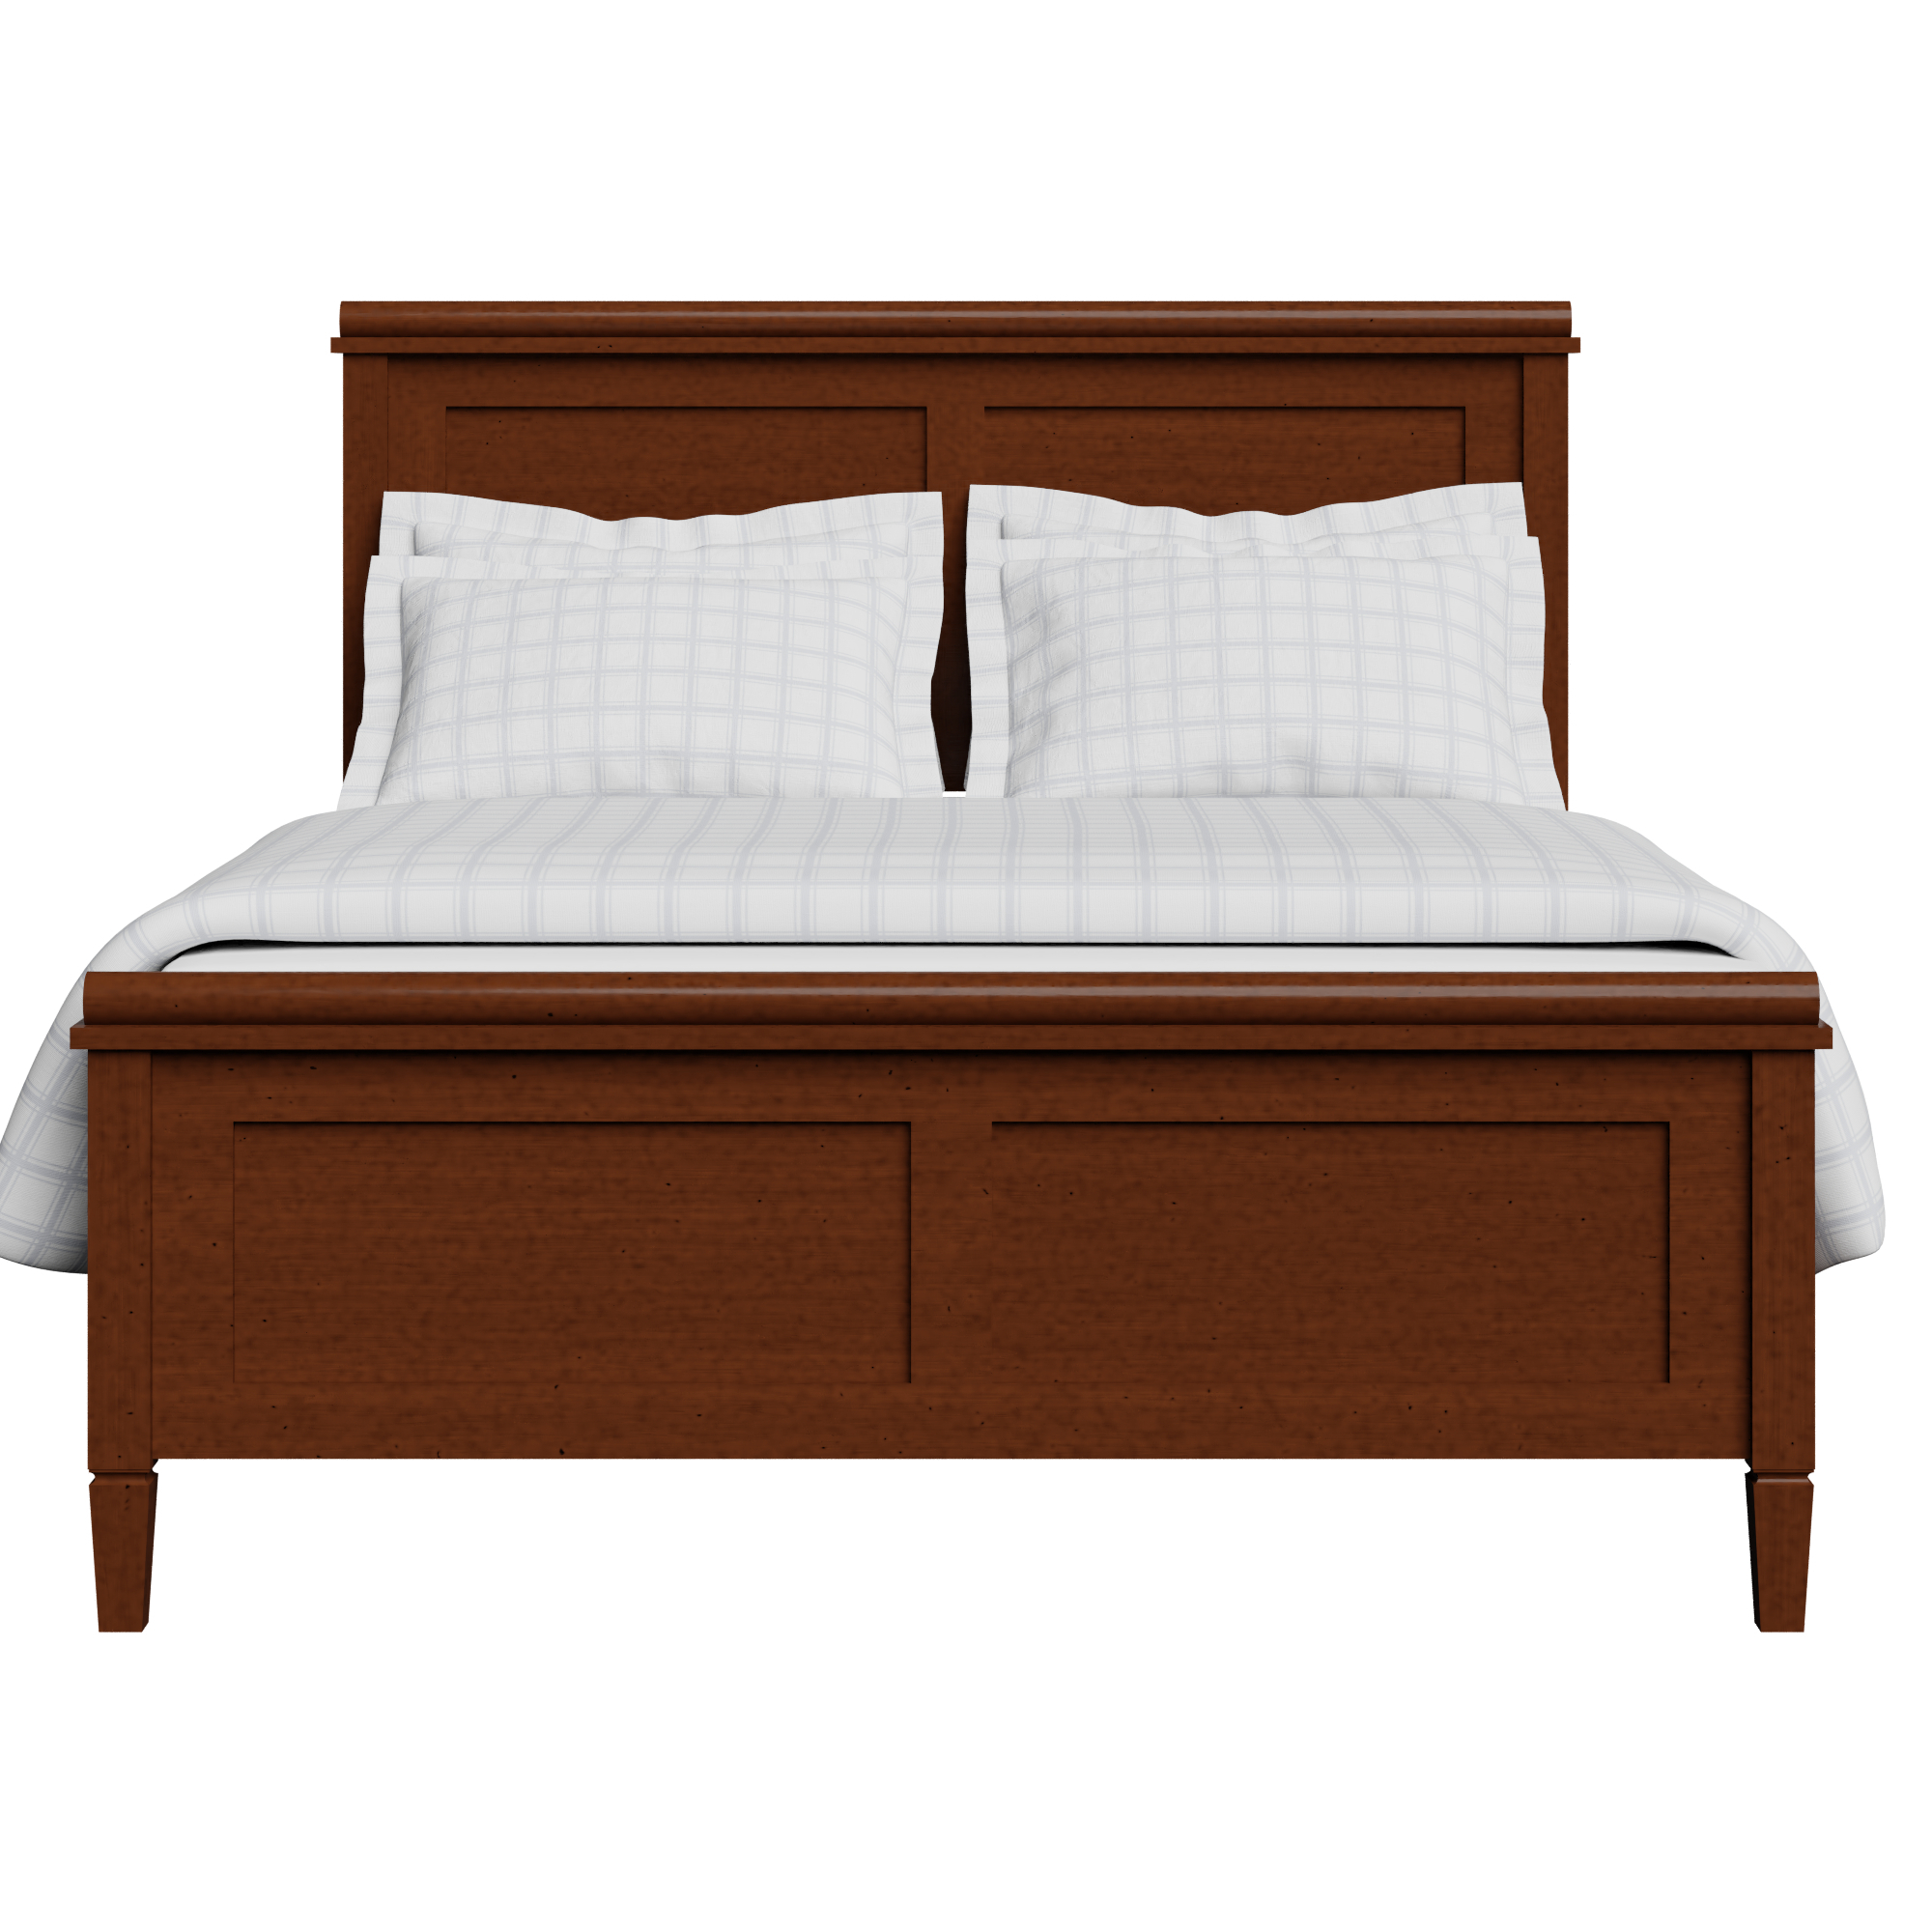 Nocturne Wooden Bed Frame The, Small Double Wood Bed Frame Uk